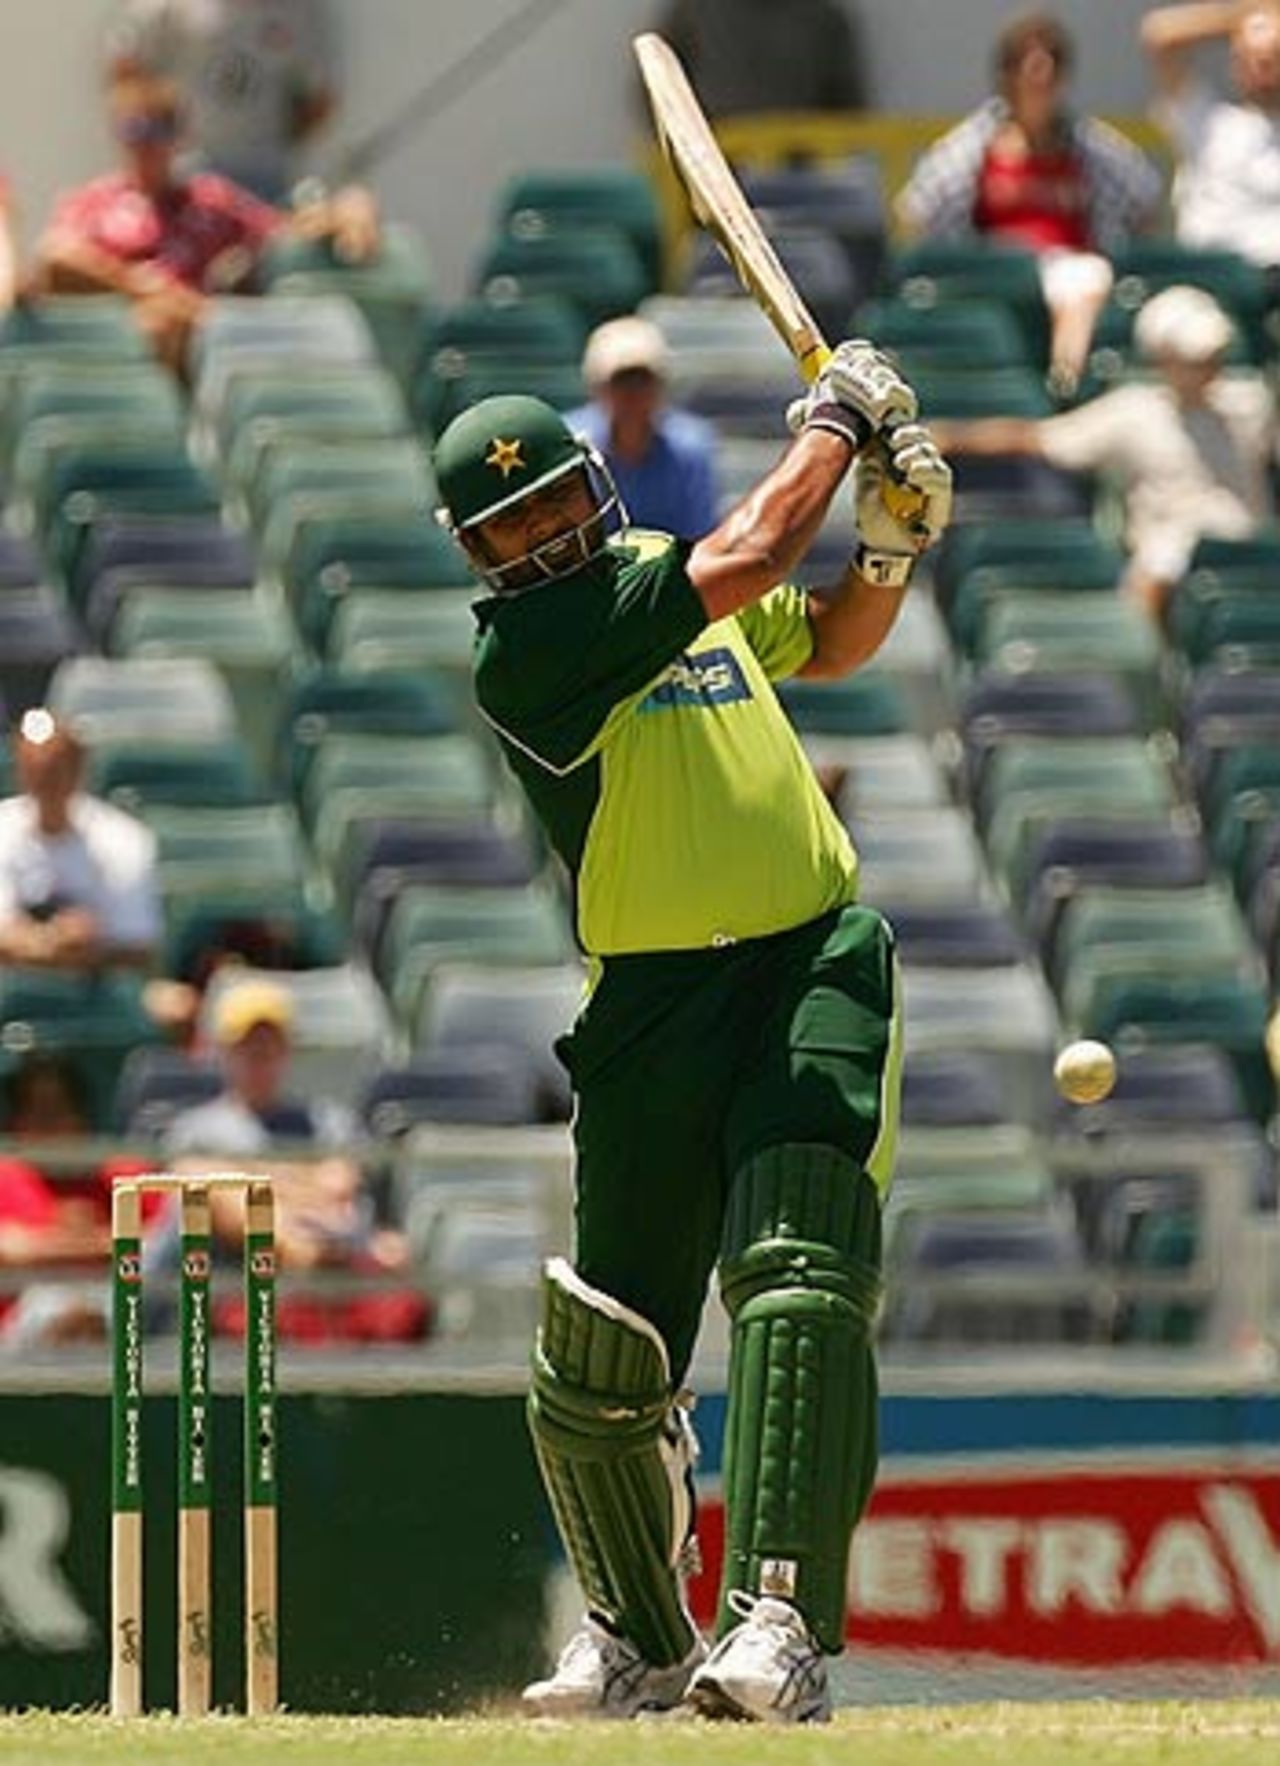 Inzamam-ul-Haq lofts one straight over the bowler, Pakistan v West Indies, VB Series, Perth, February 1, 2005